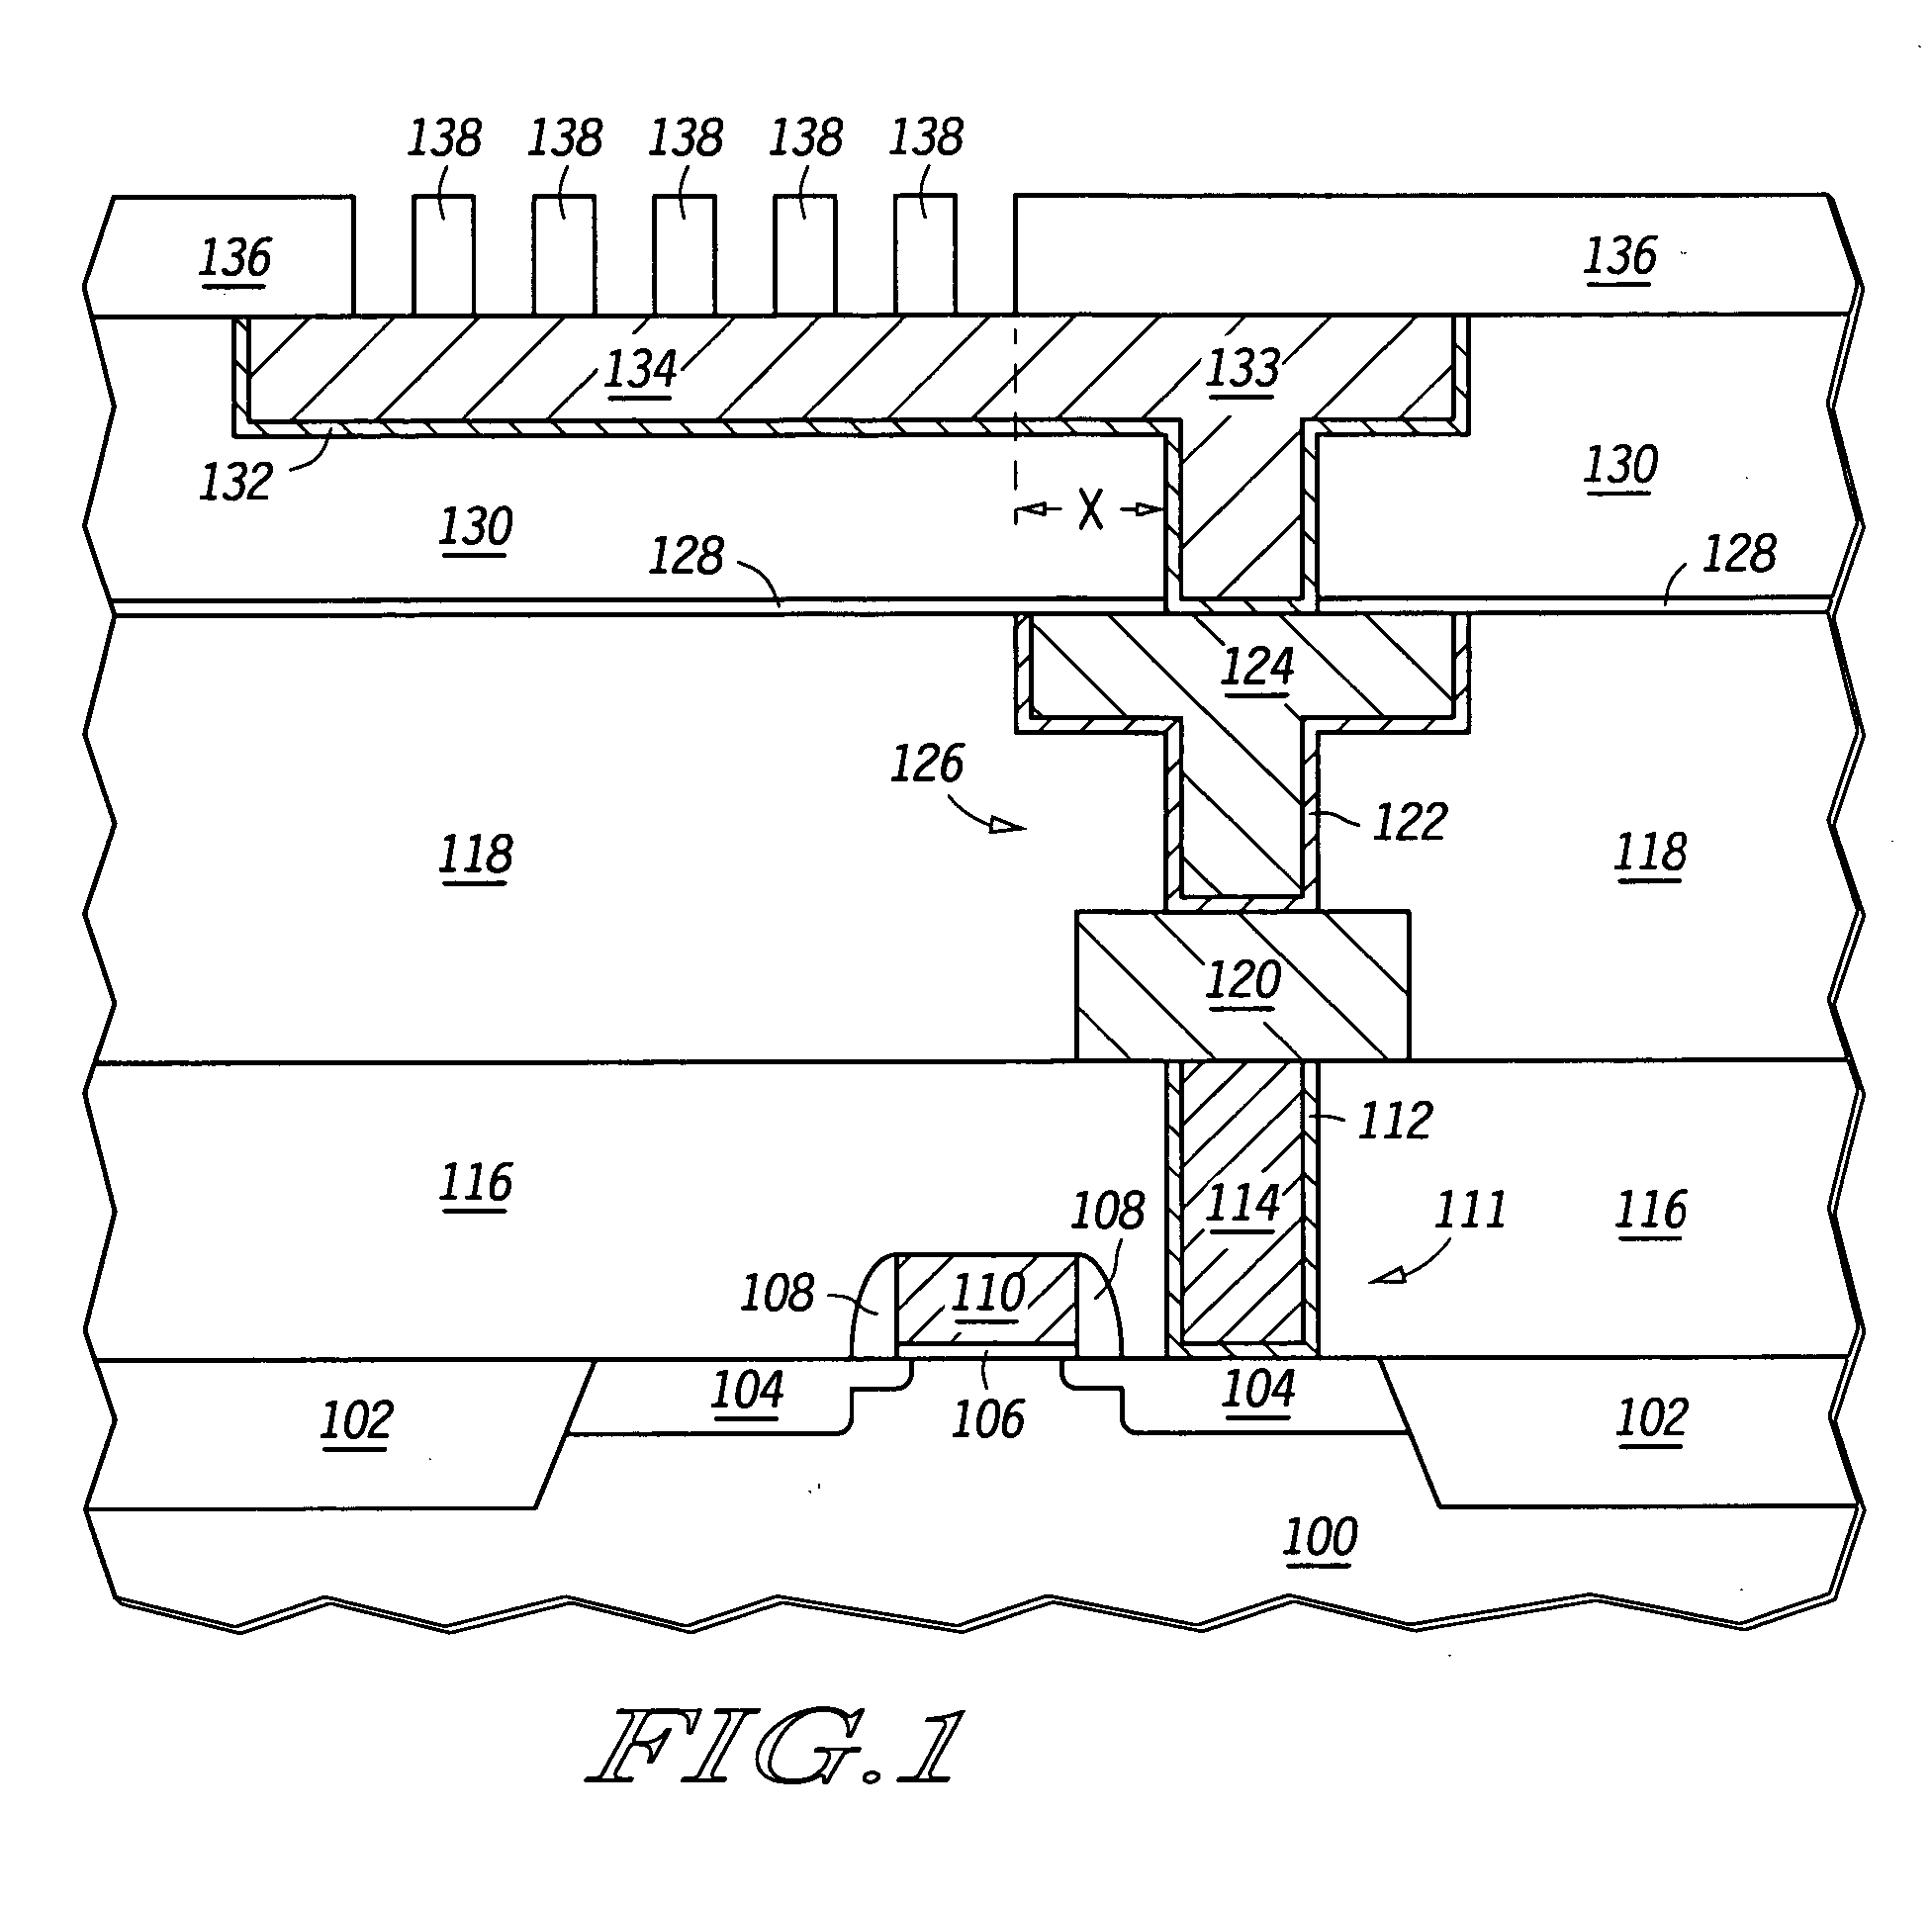 Method for forming a bond pad interface